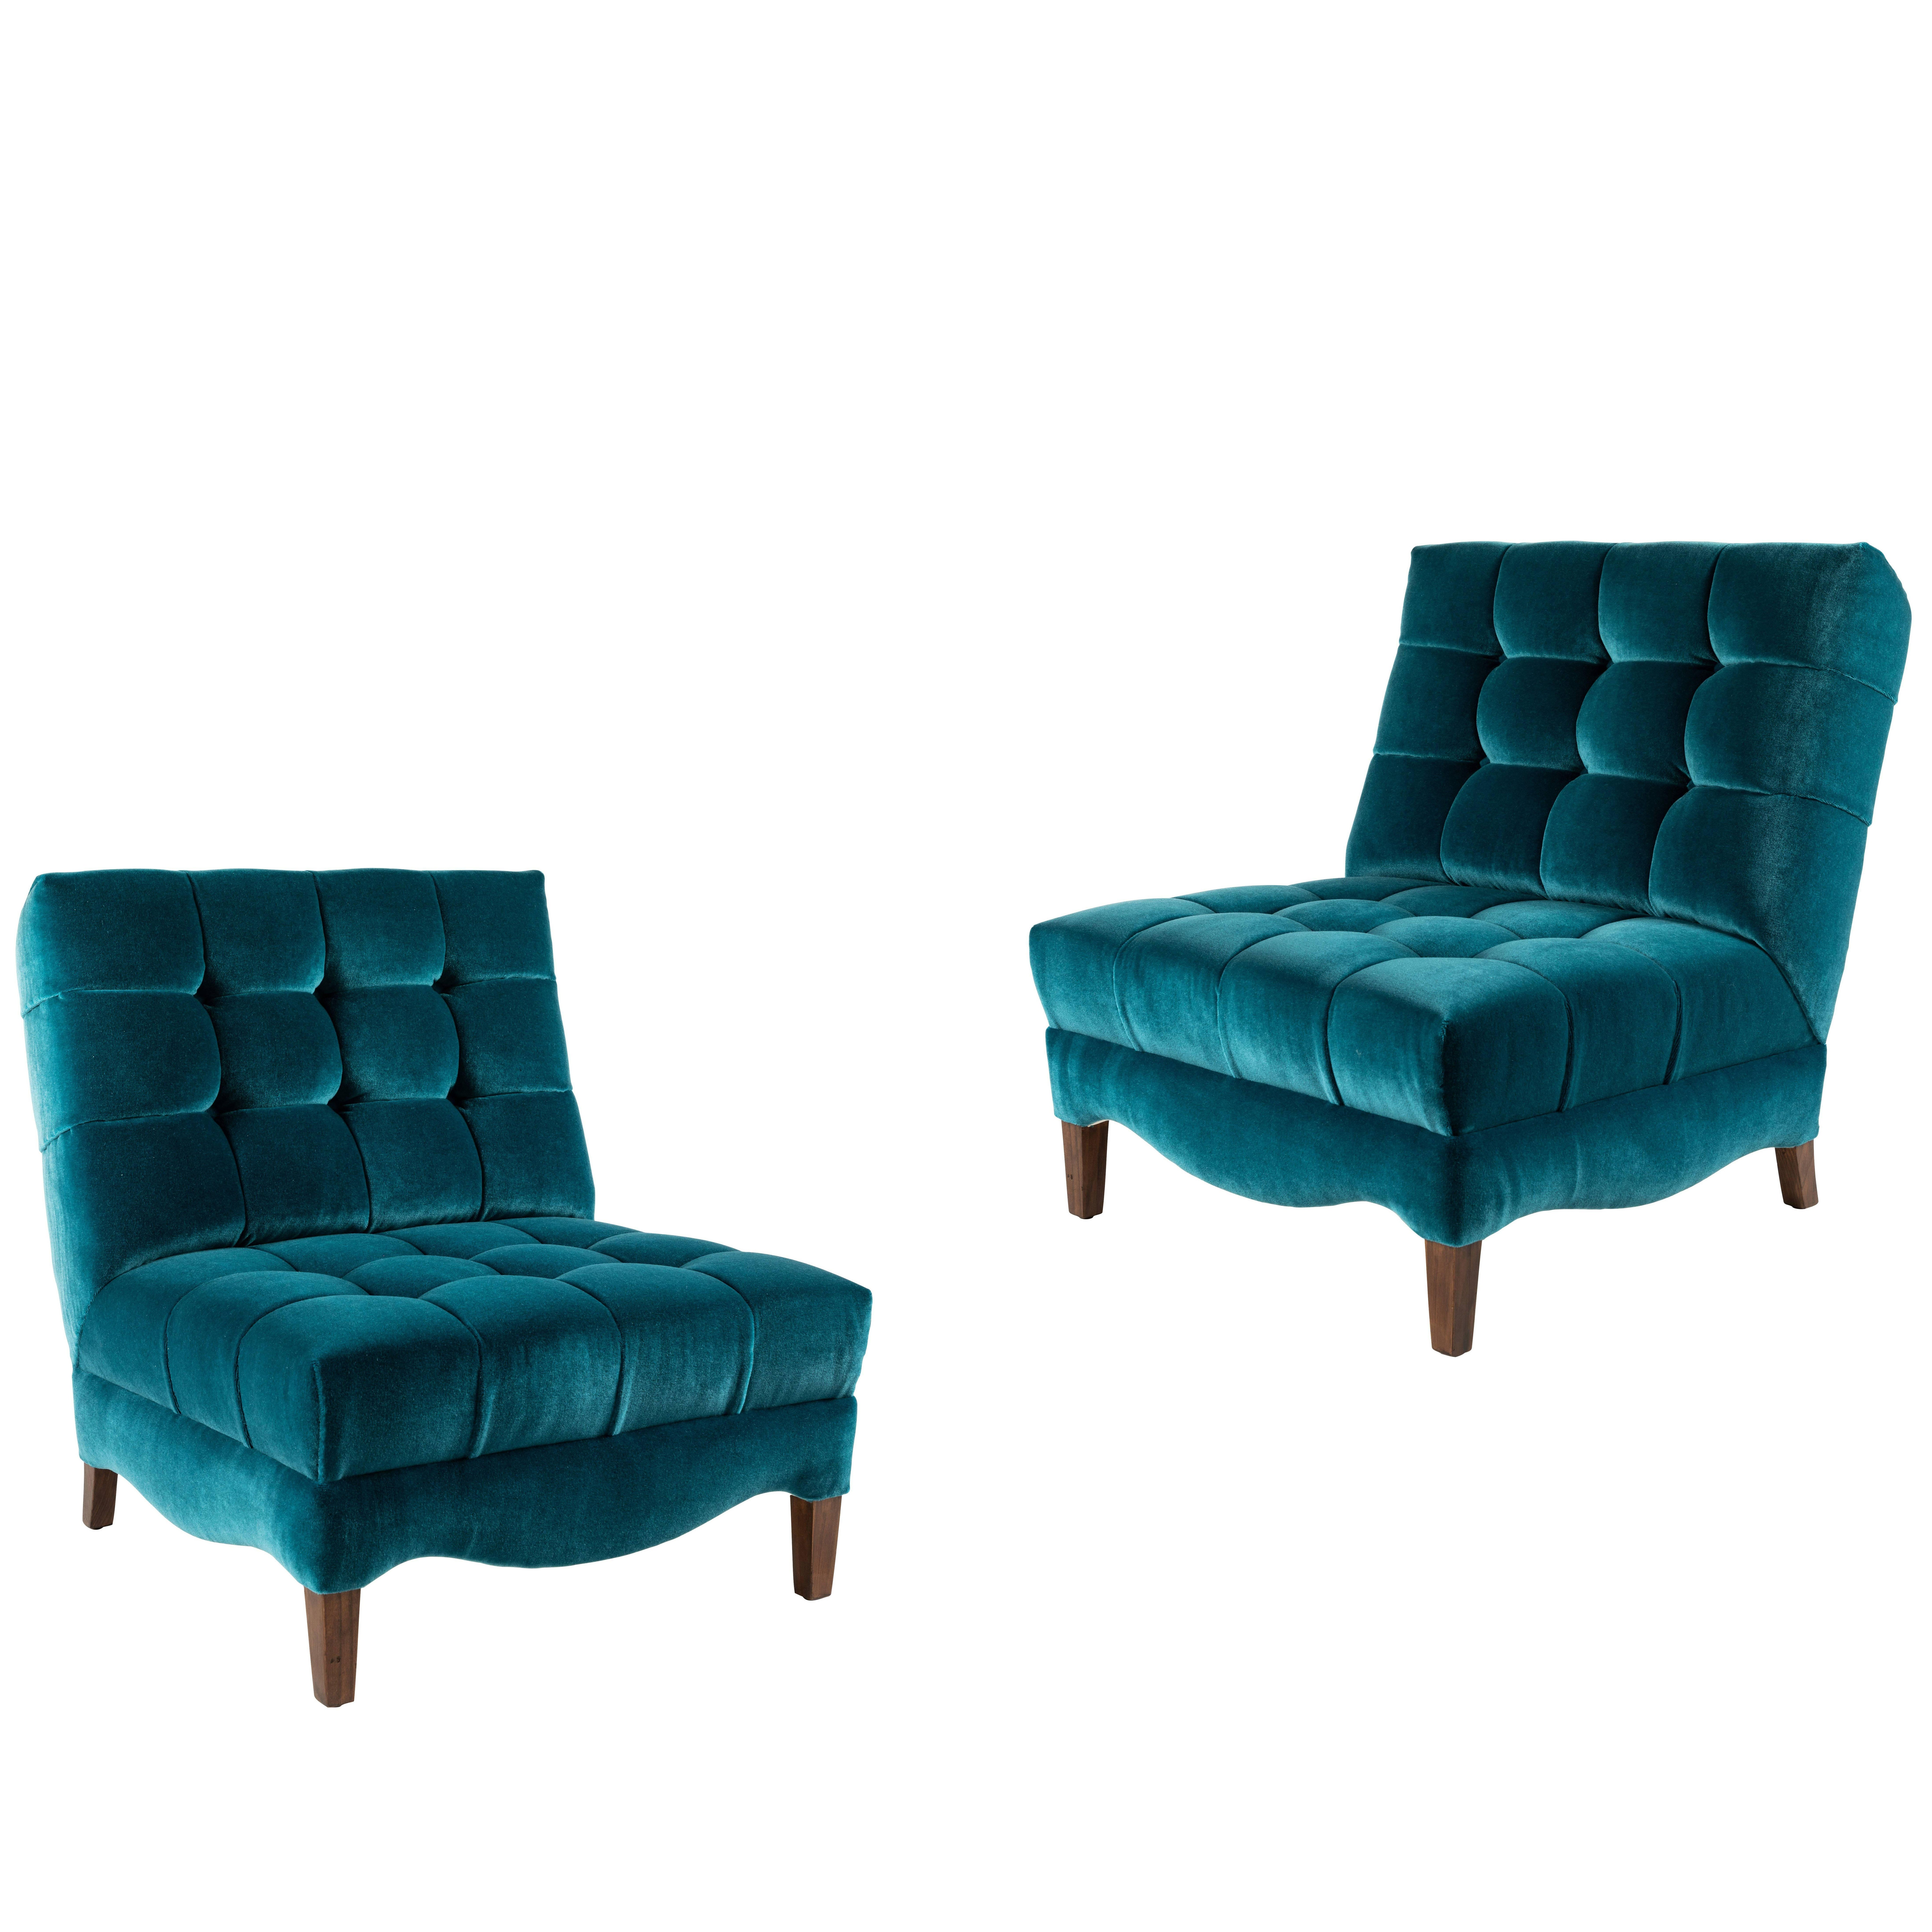 Pair of Biscuit-Tufted Slipper Chairs Covered in Teal Mohair